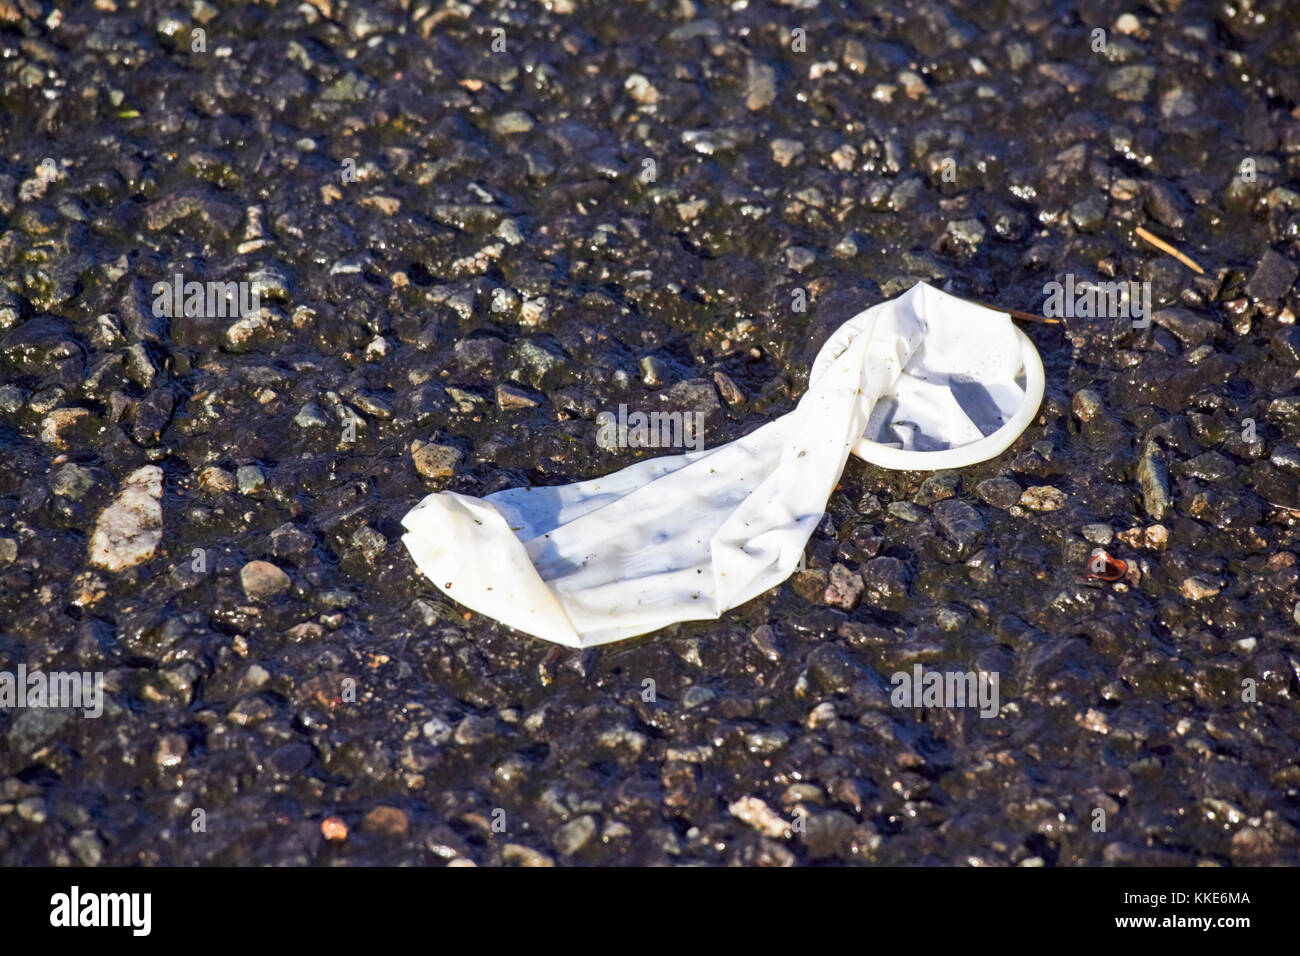 used condom discarded on a street in the uk Stock Photo